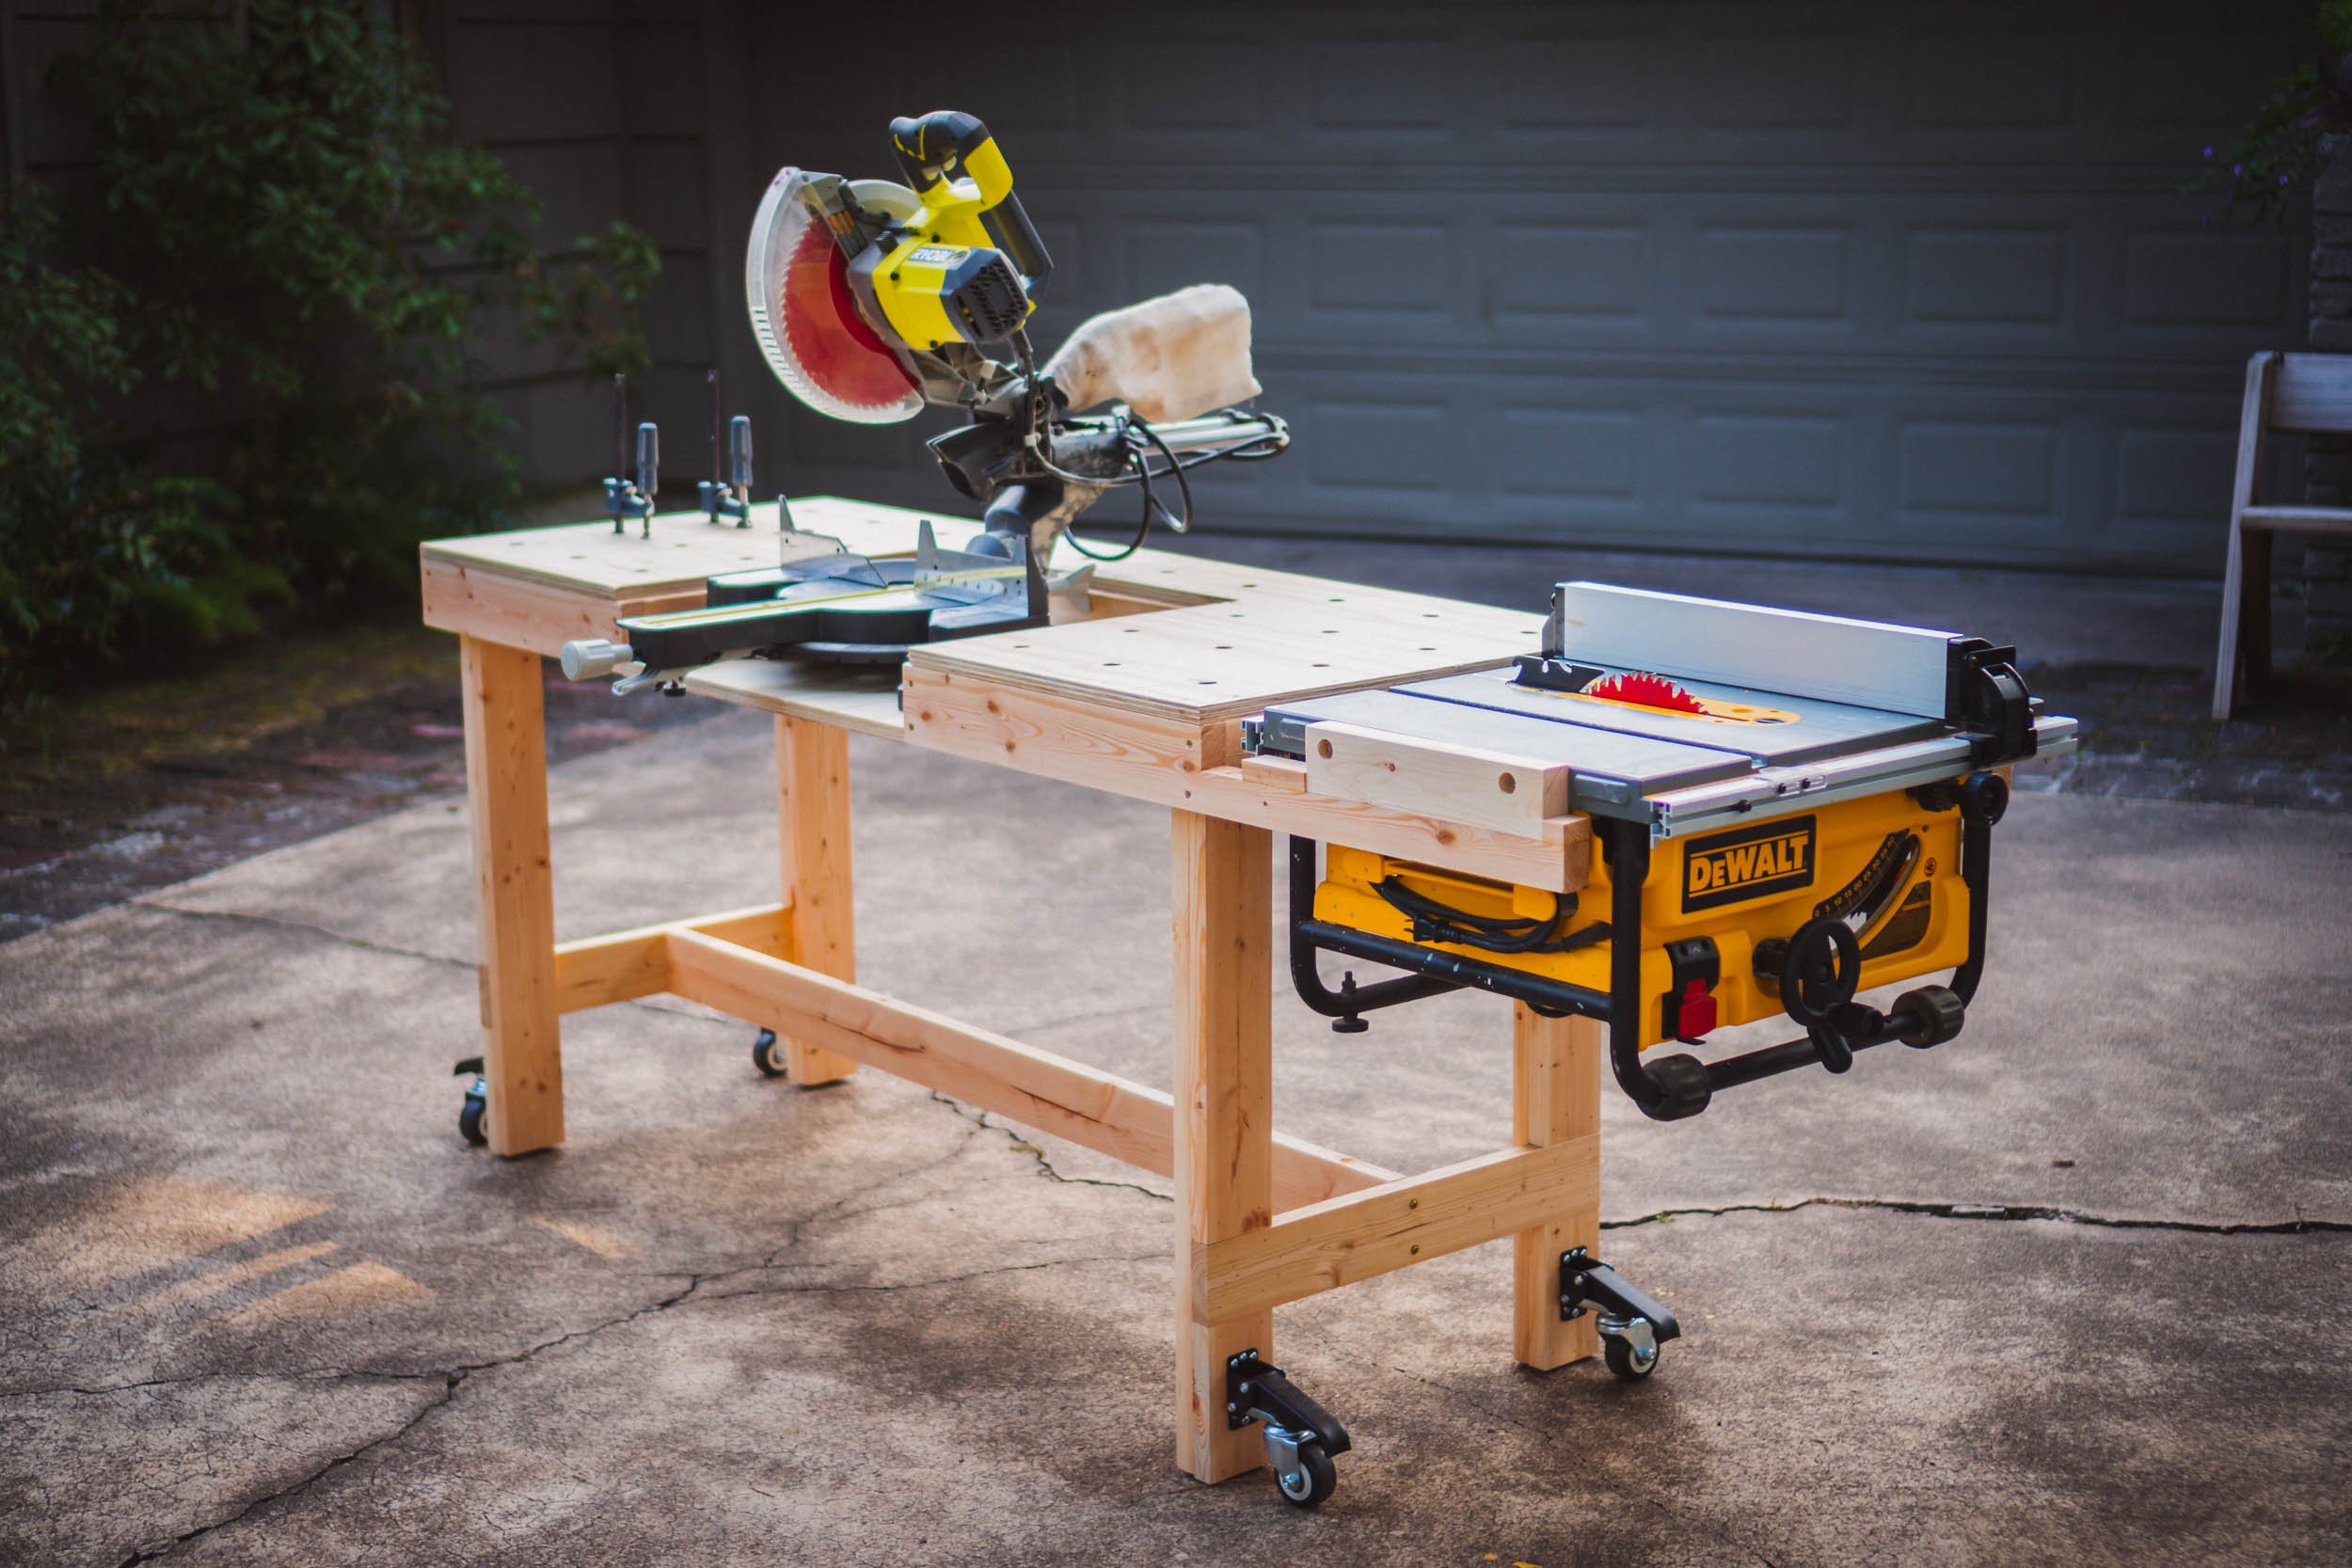 Multifunction Workbench Project Plans — Moser Makes